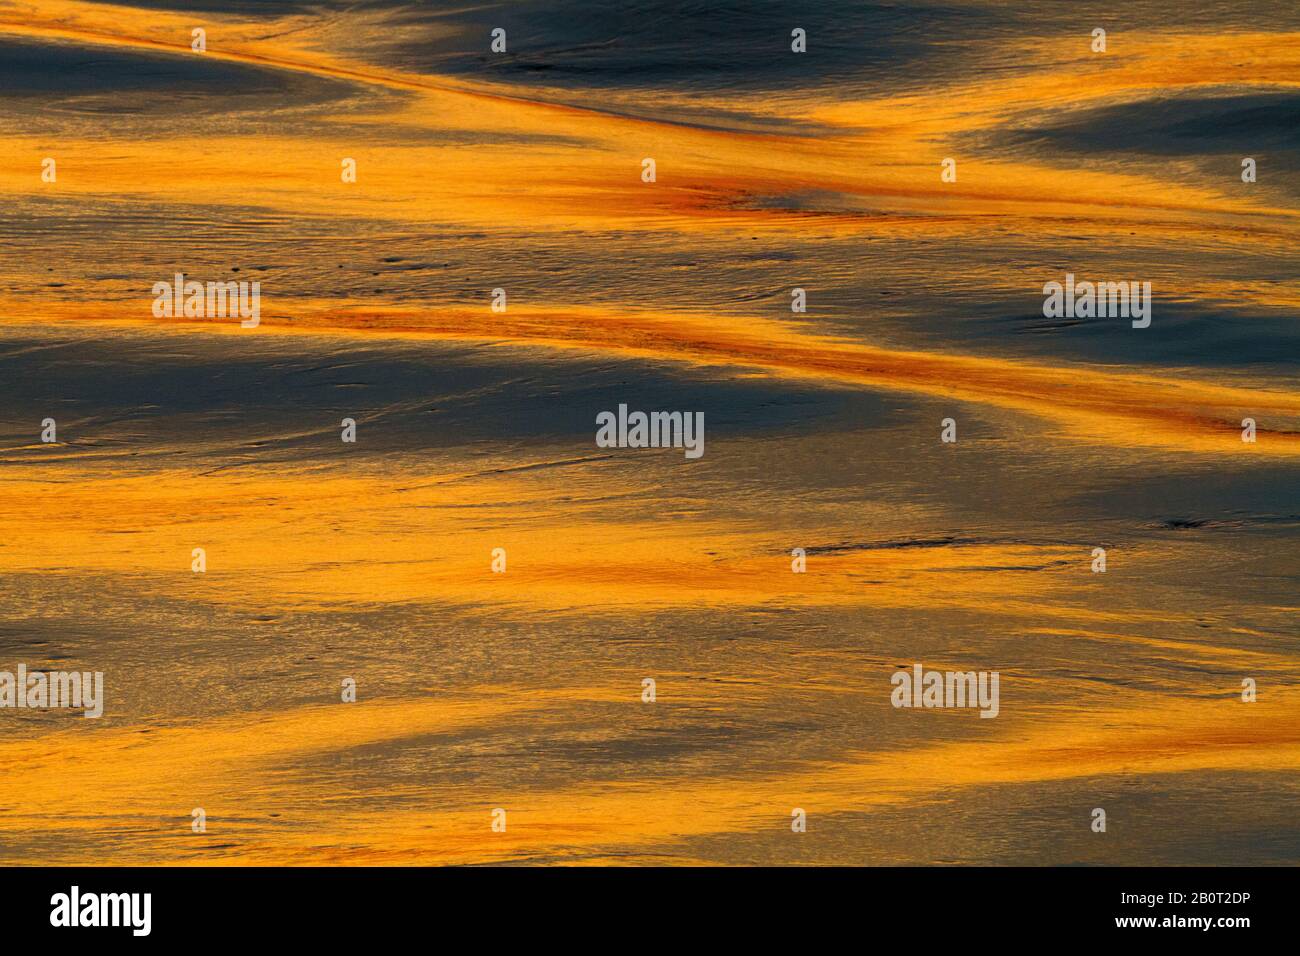 Reflection in water at sunset, Netherlands Stock Photo